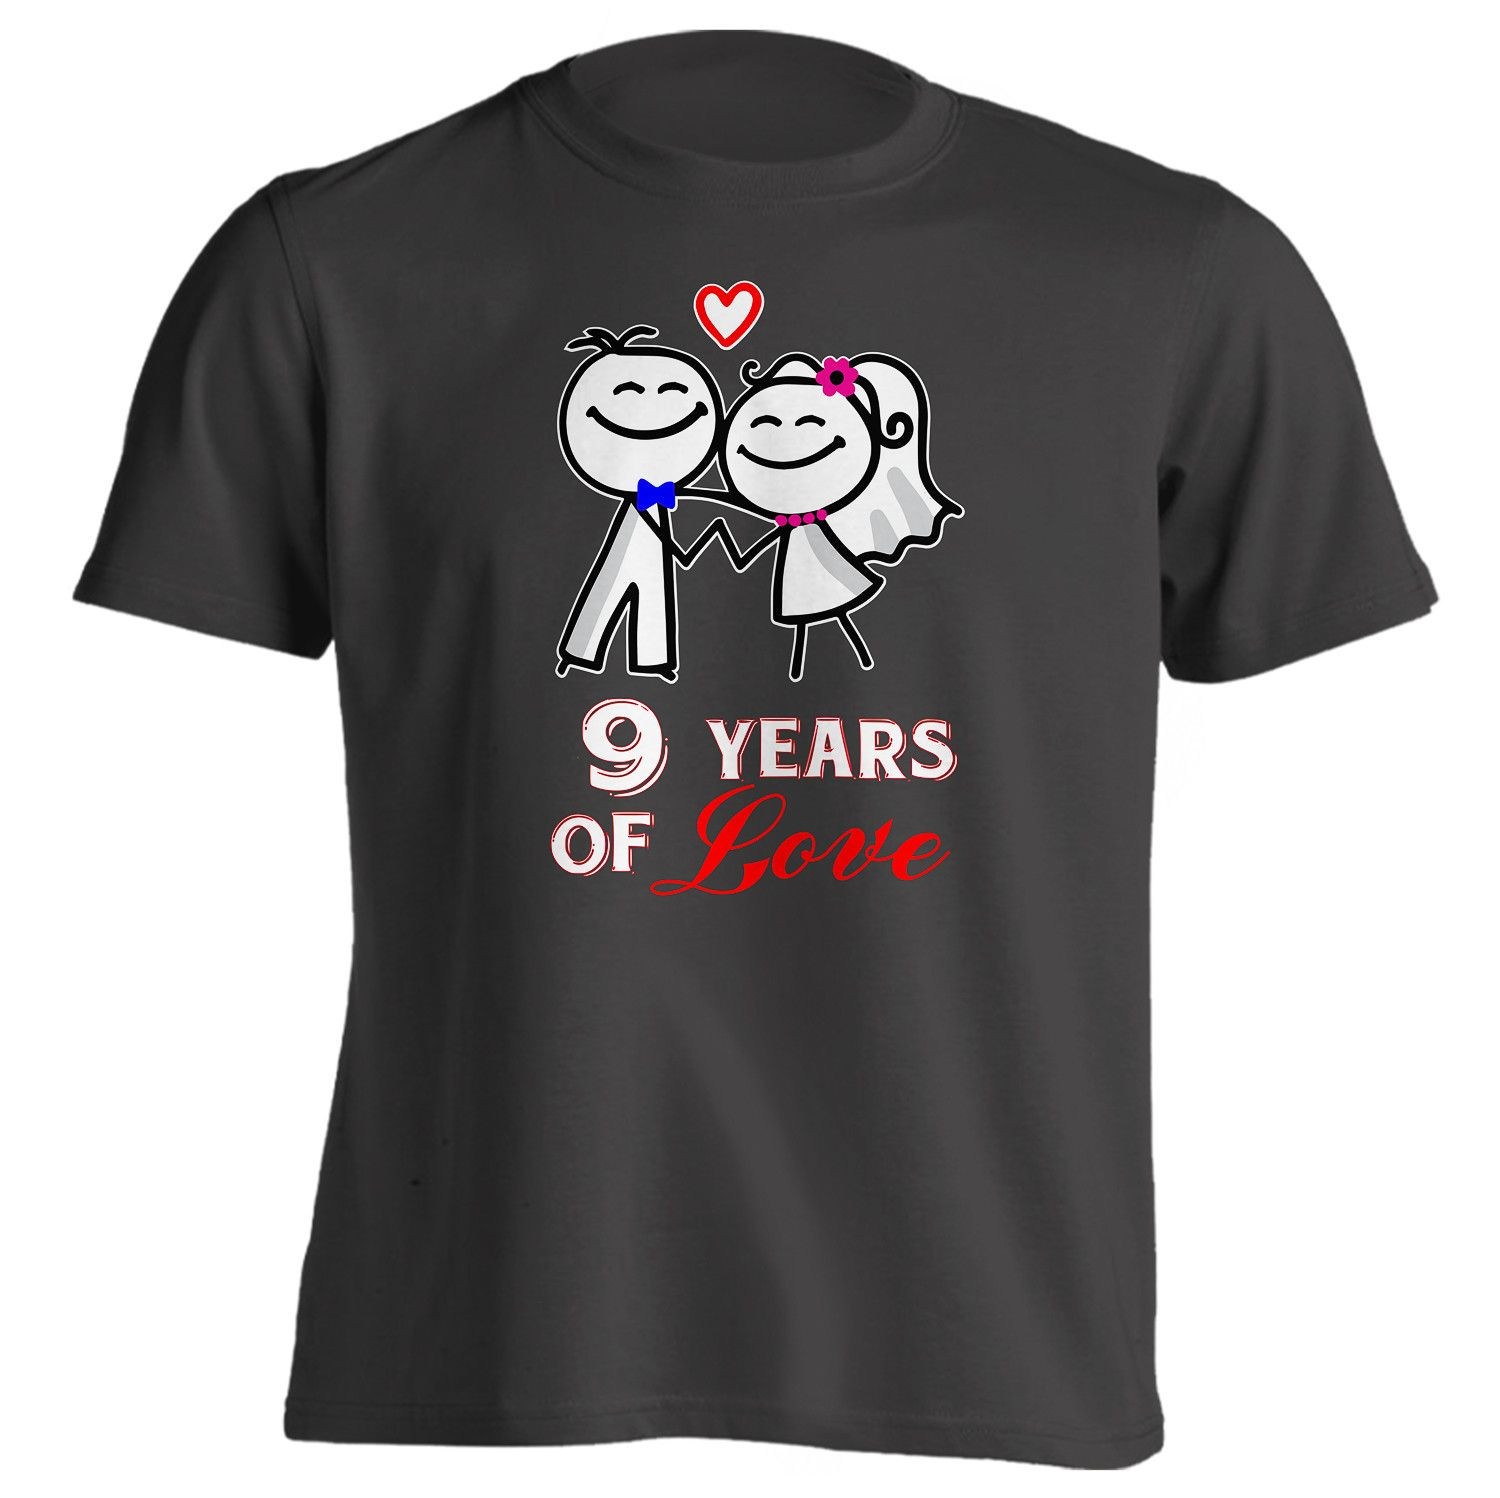 Wedding Sparklers Direct Coupon
 9th Anniversary Gift 9 Years of Love Shirt